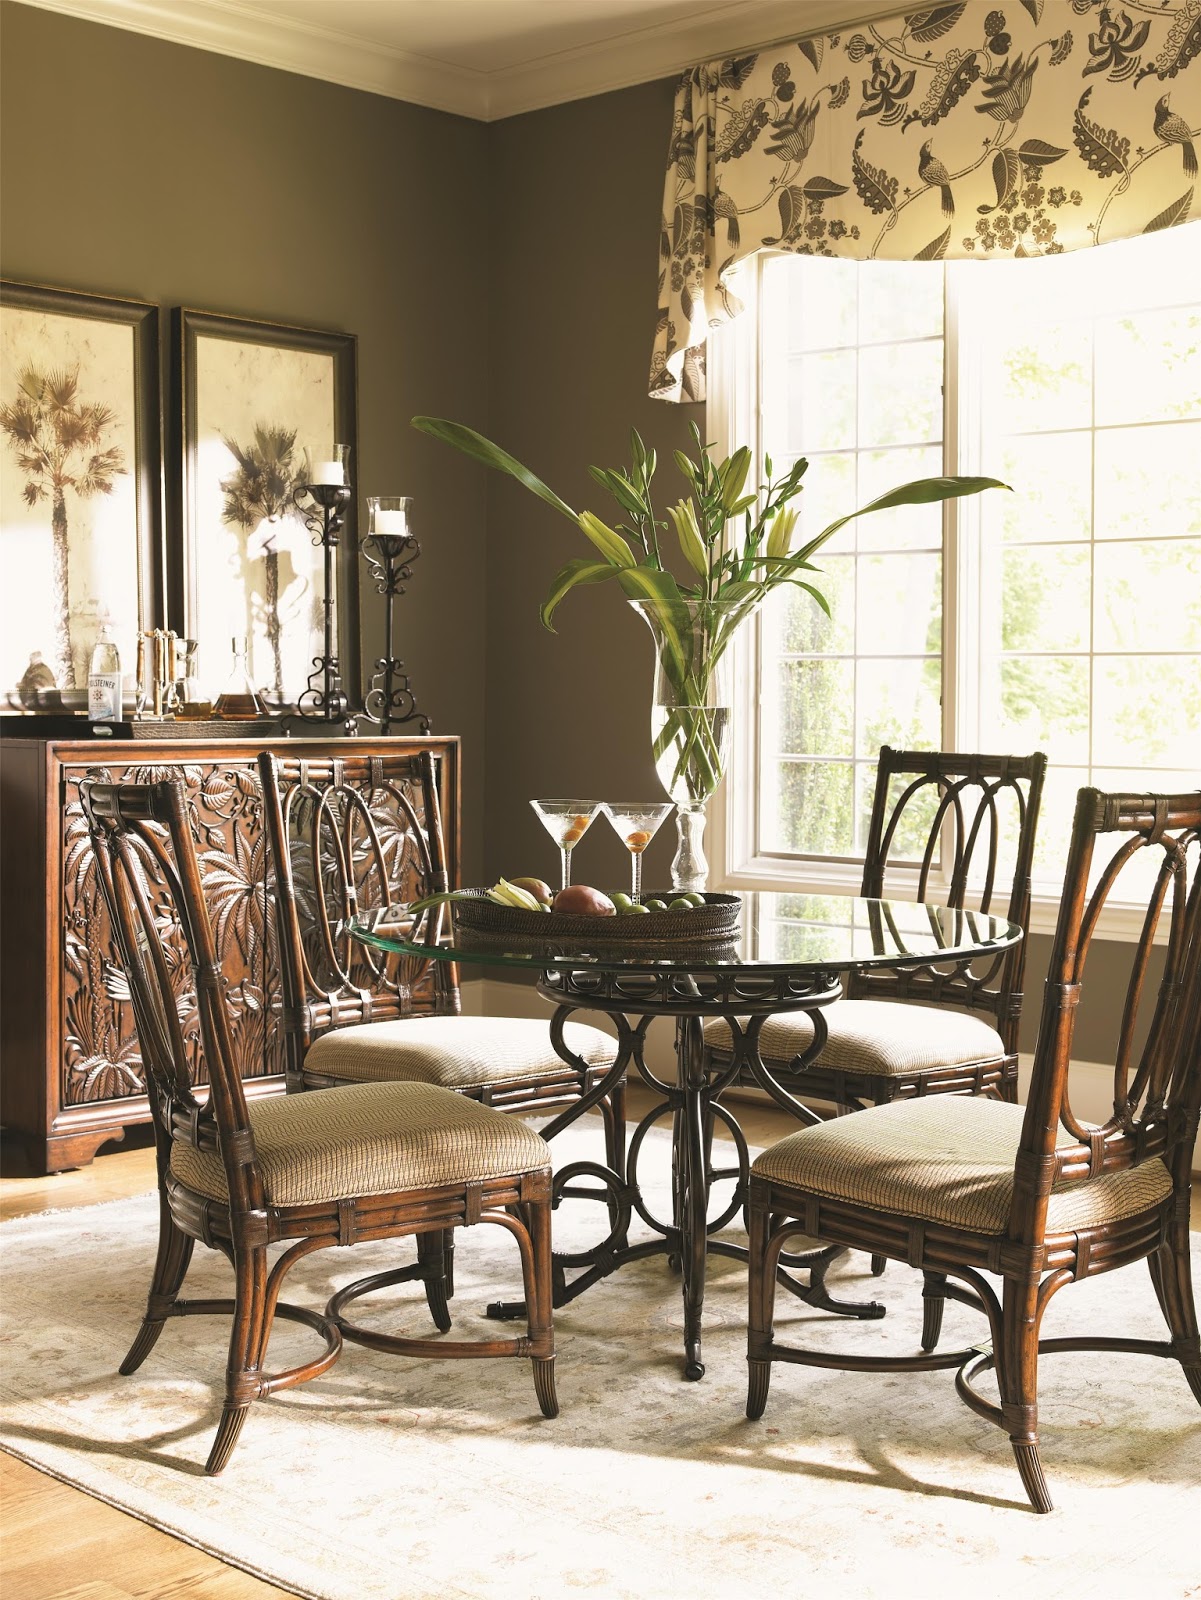 Baer's Furniture Store: Dining Room Sets for Casual Entertaining